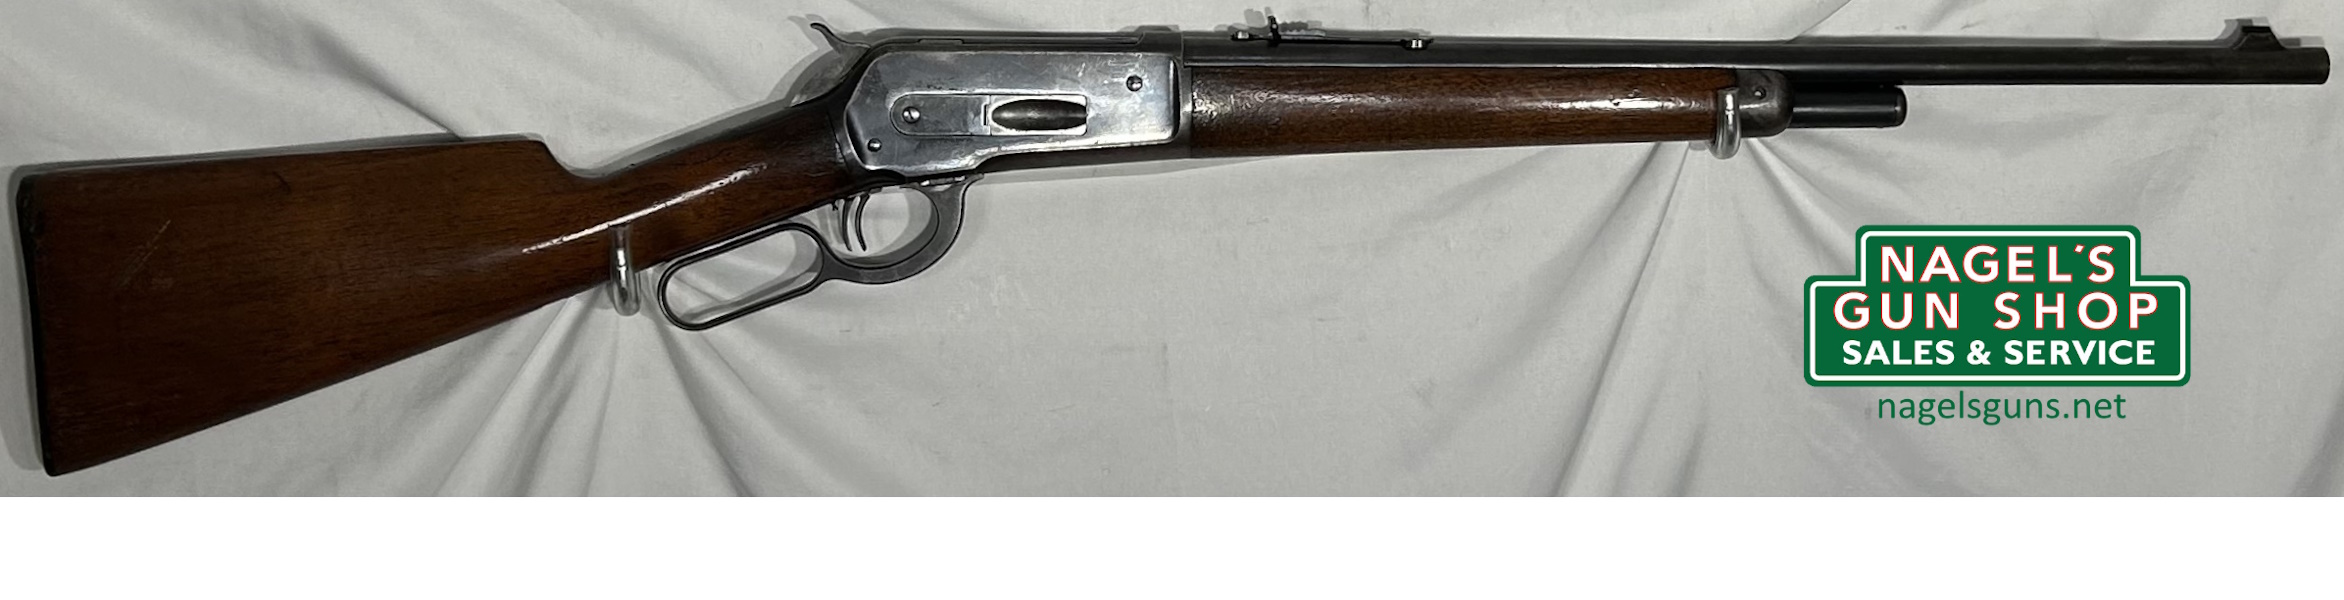 Winchester 1886 33 WCF Rifle